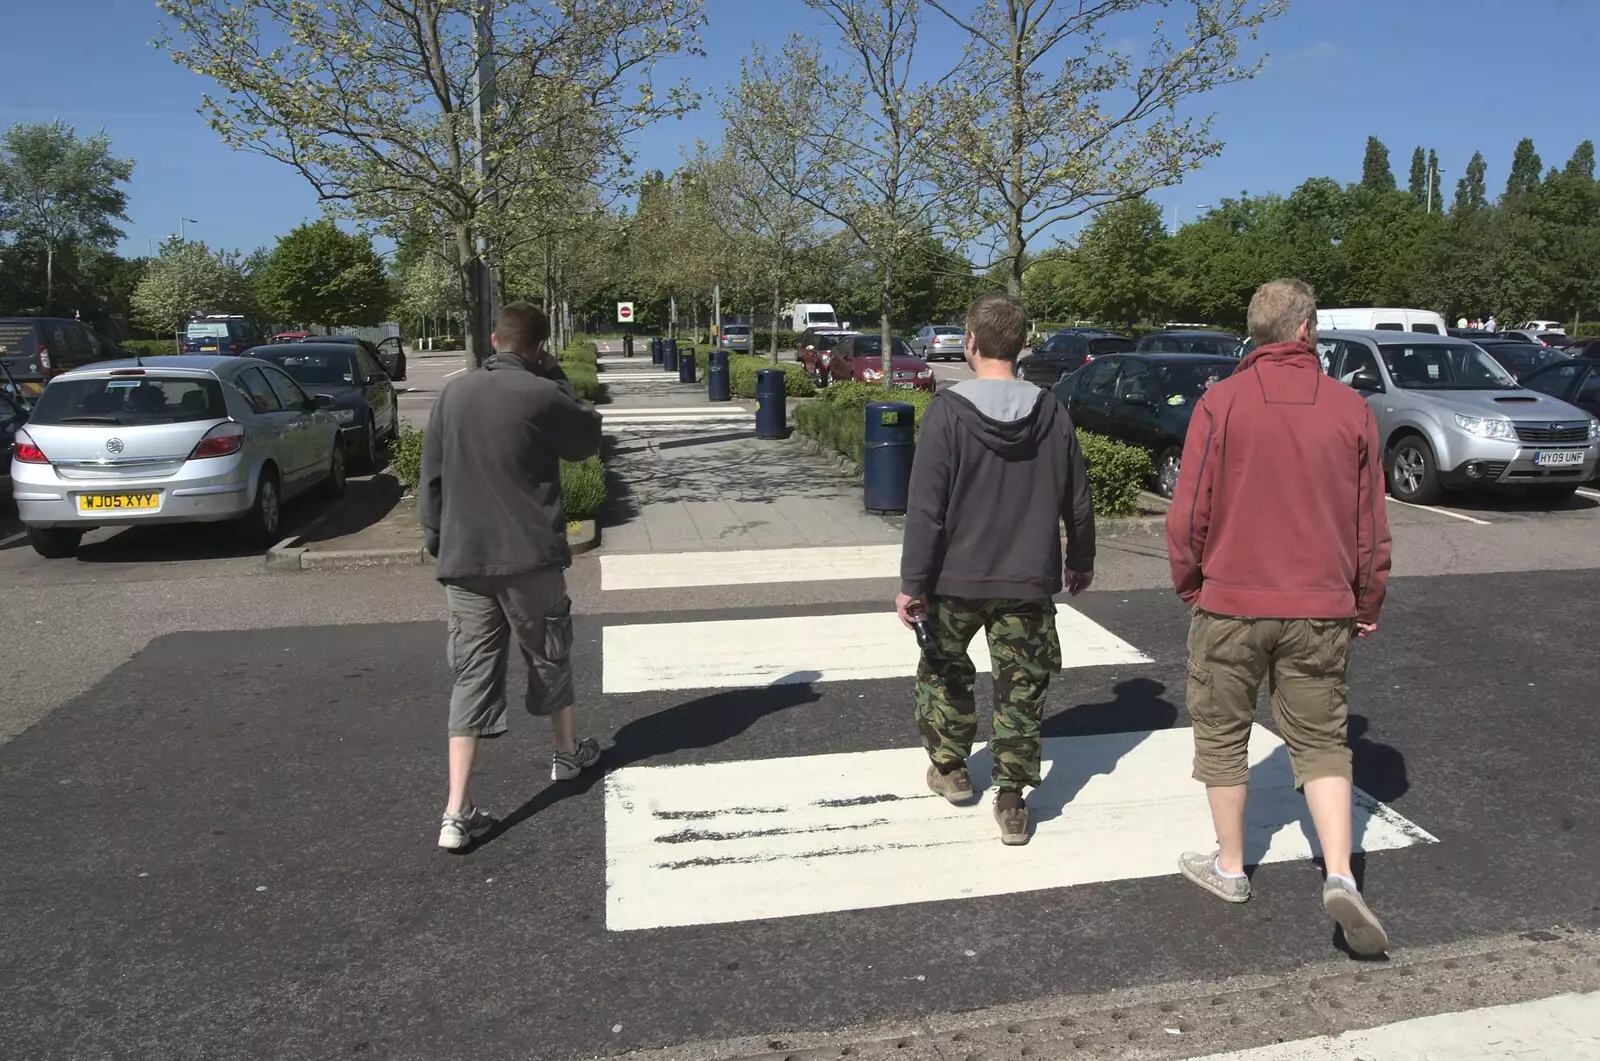 The lads do 'Abbey Road' thing at South Mimms, from Nosher's Stag Weekend: Paintball at Emery Down, and Lymington, Hampshire - 22nd May 2010